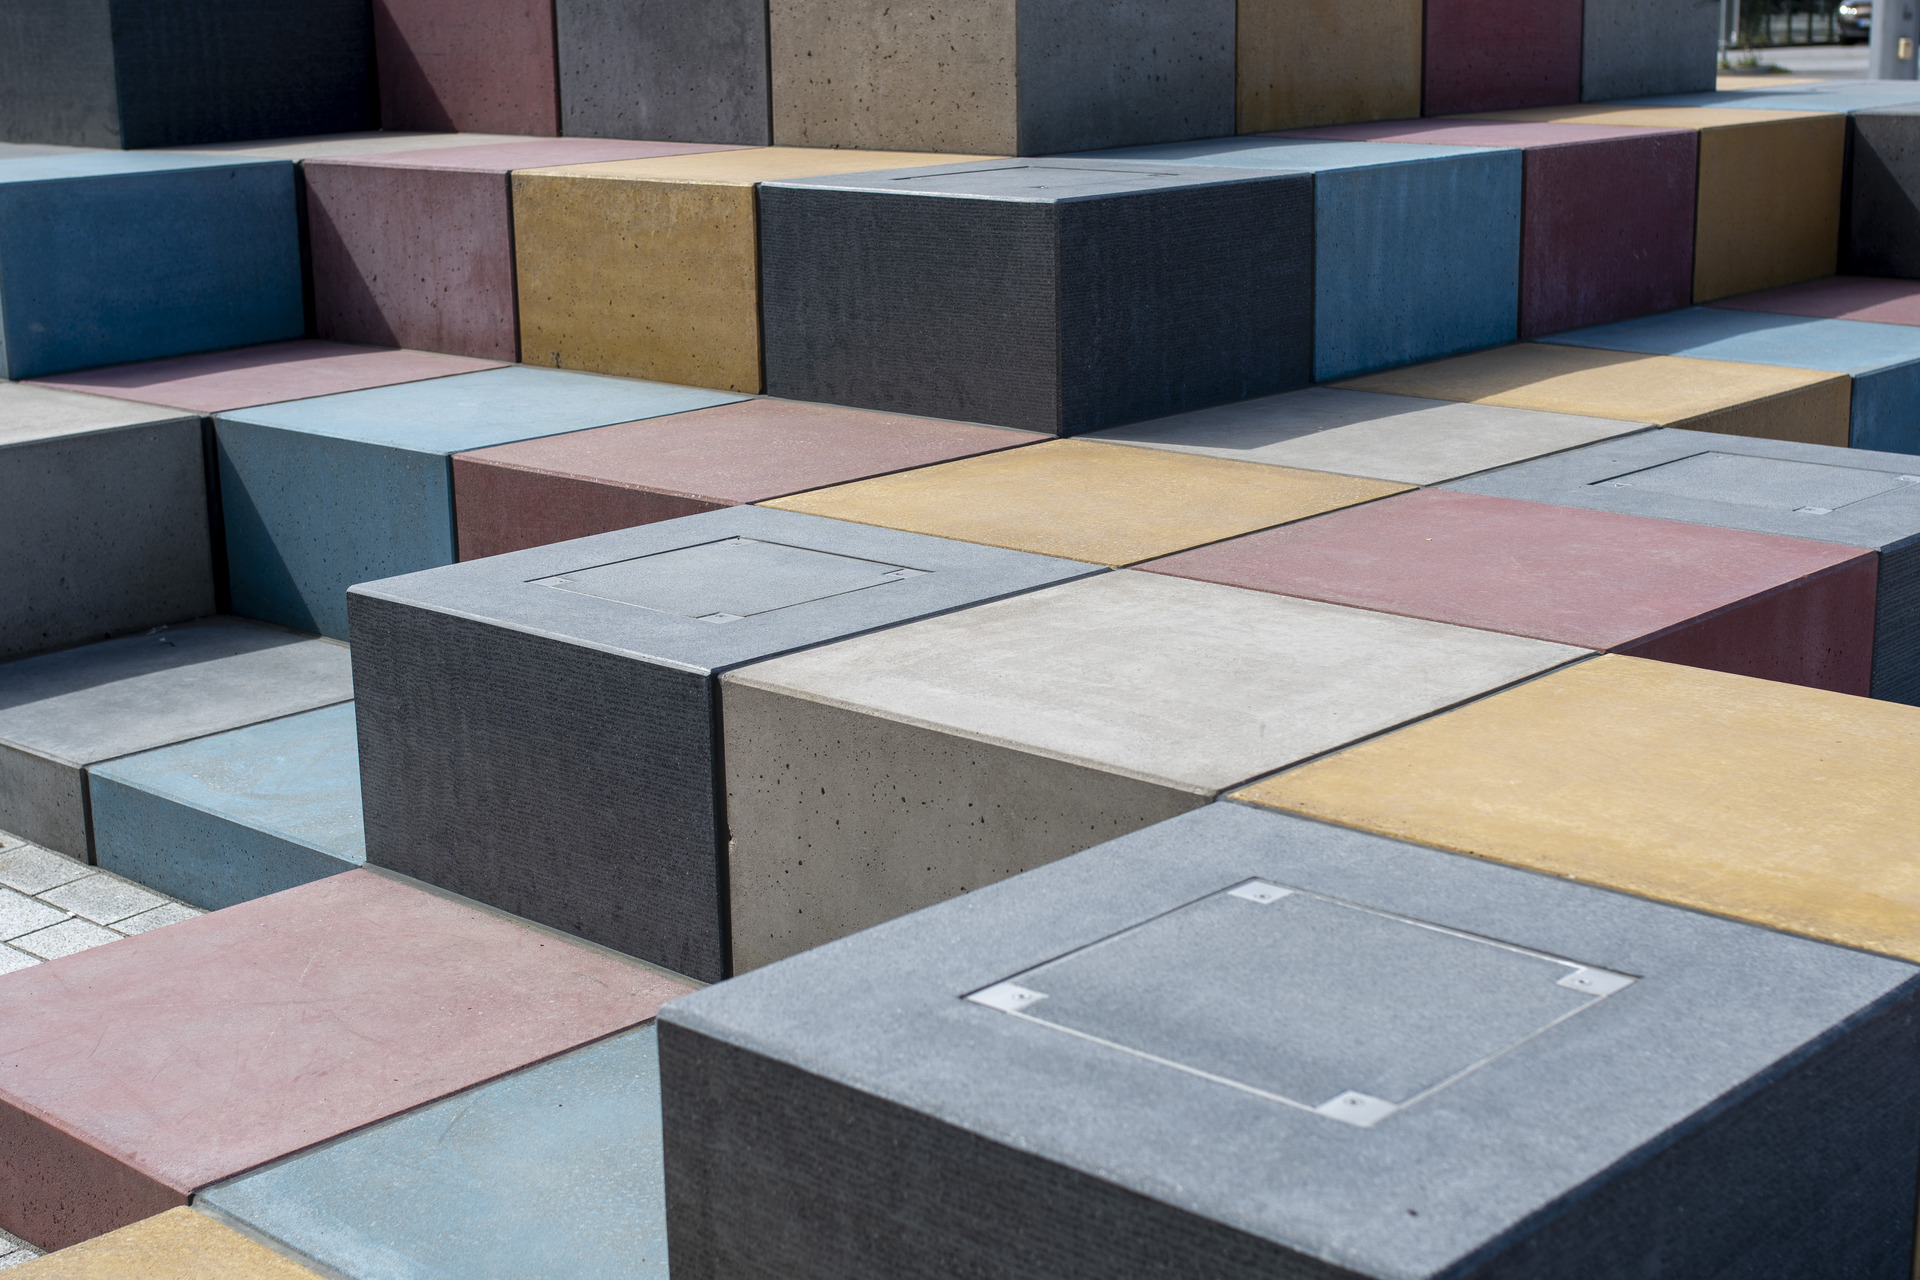 Concrete cubes at Urban Star sculpture, colored with Bayferrox pigments